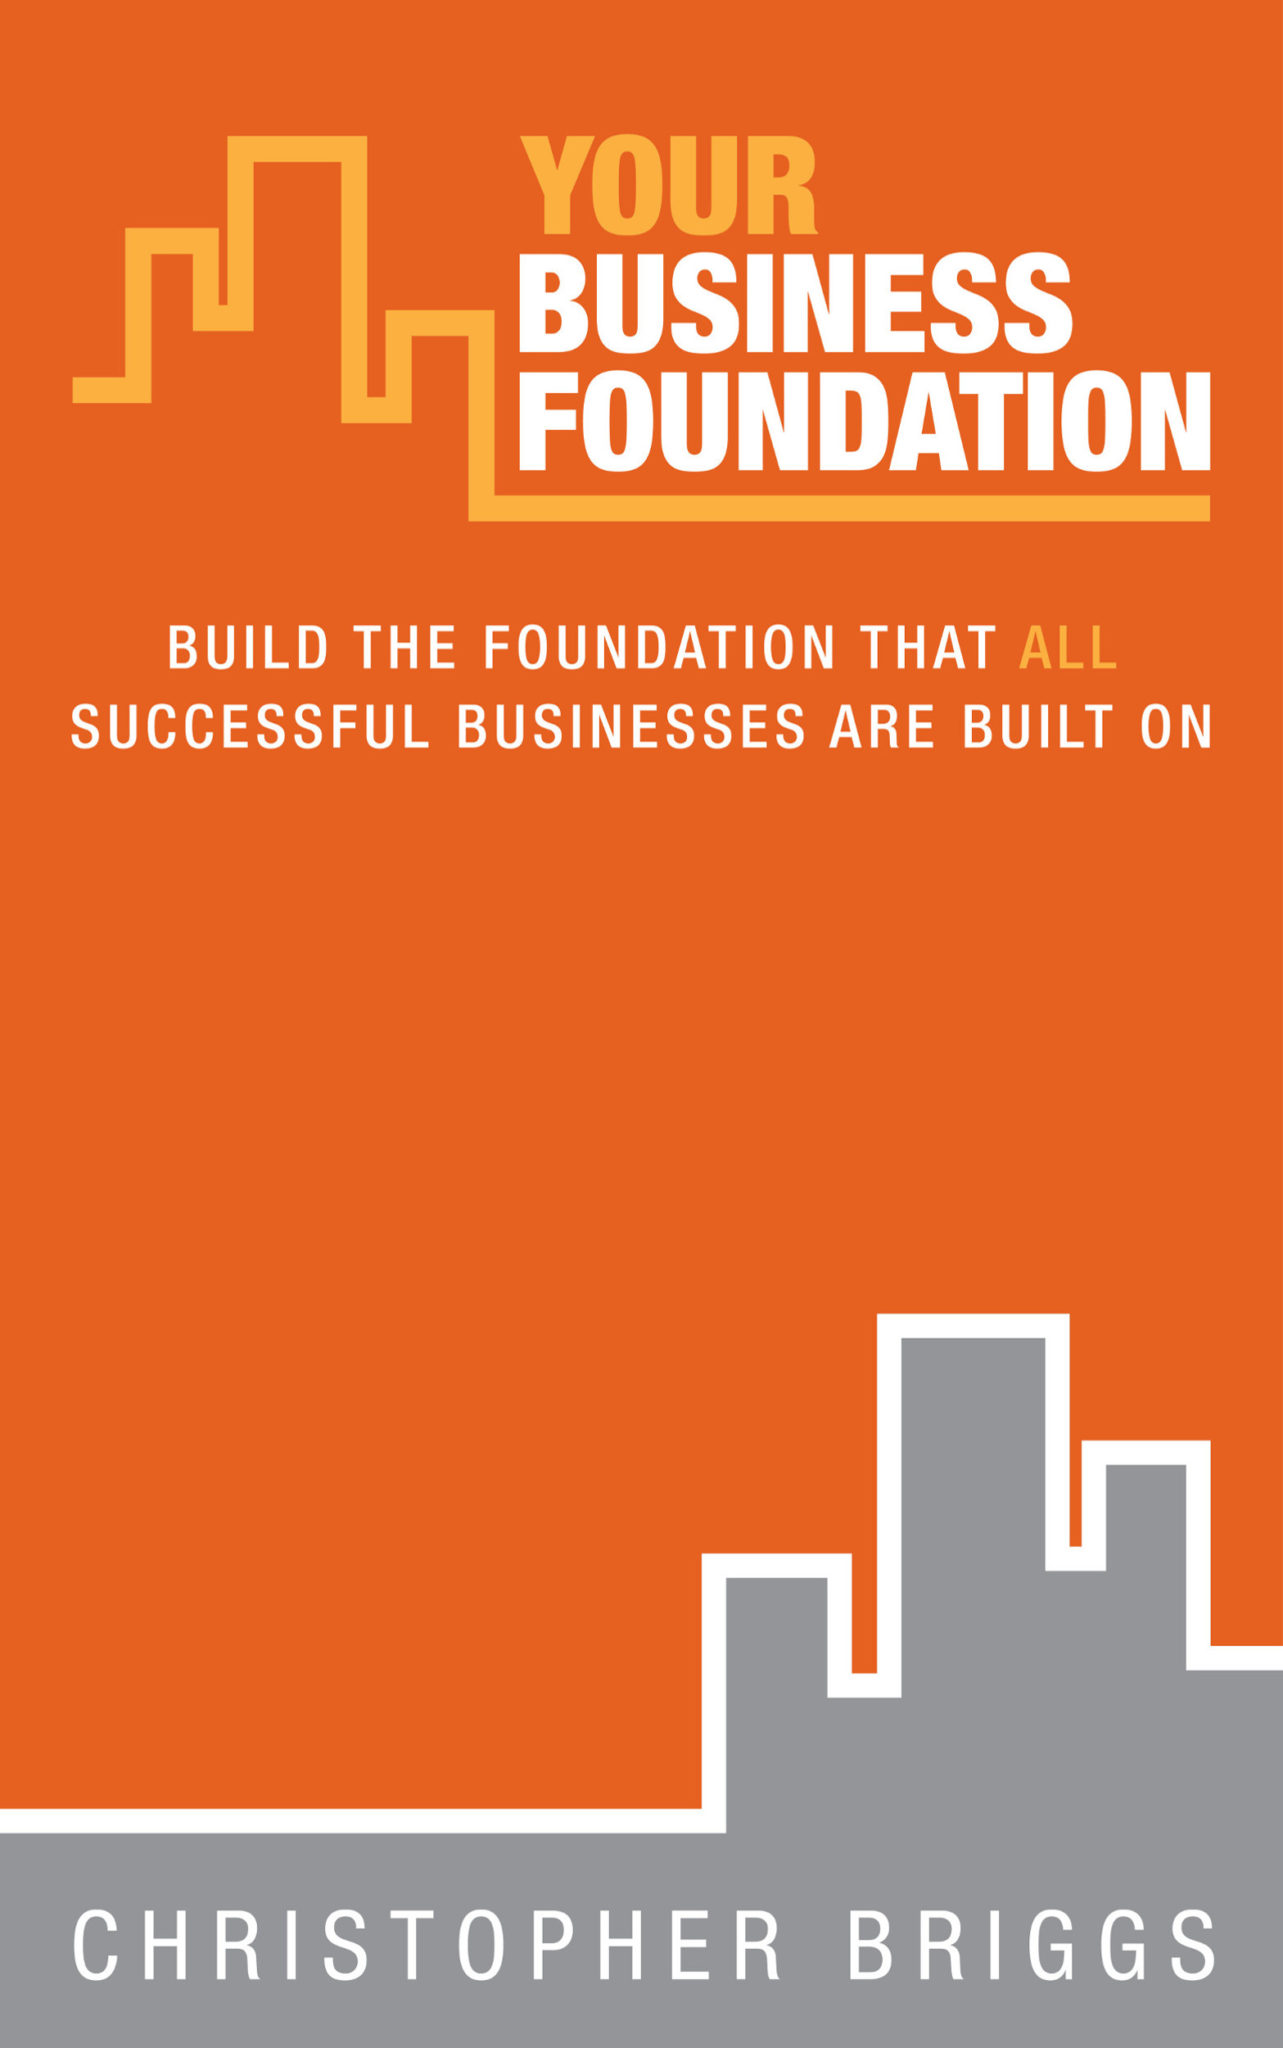 FREE: Your Business Foundation by Christopher Briggs